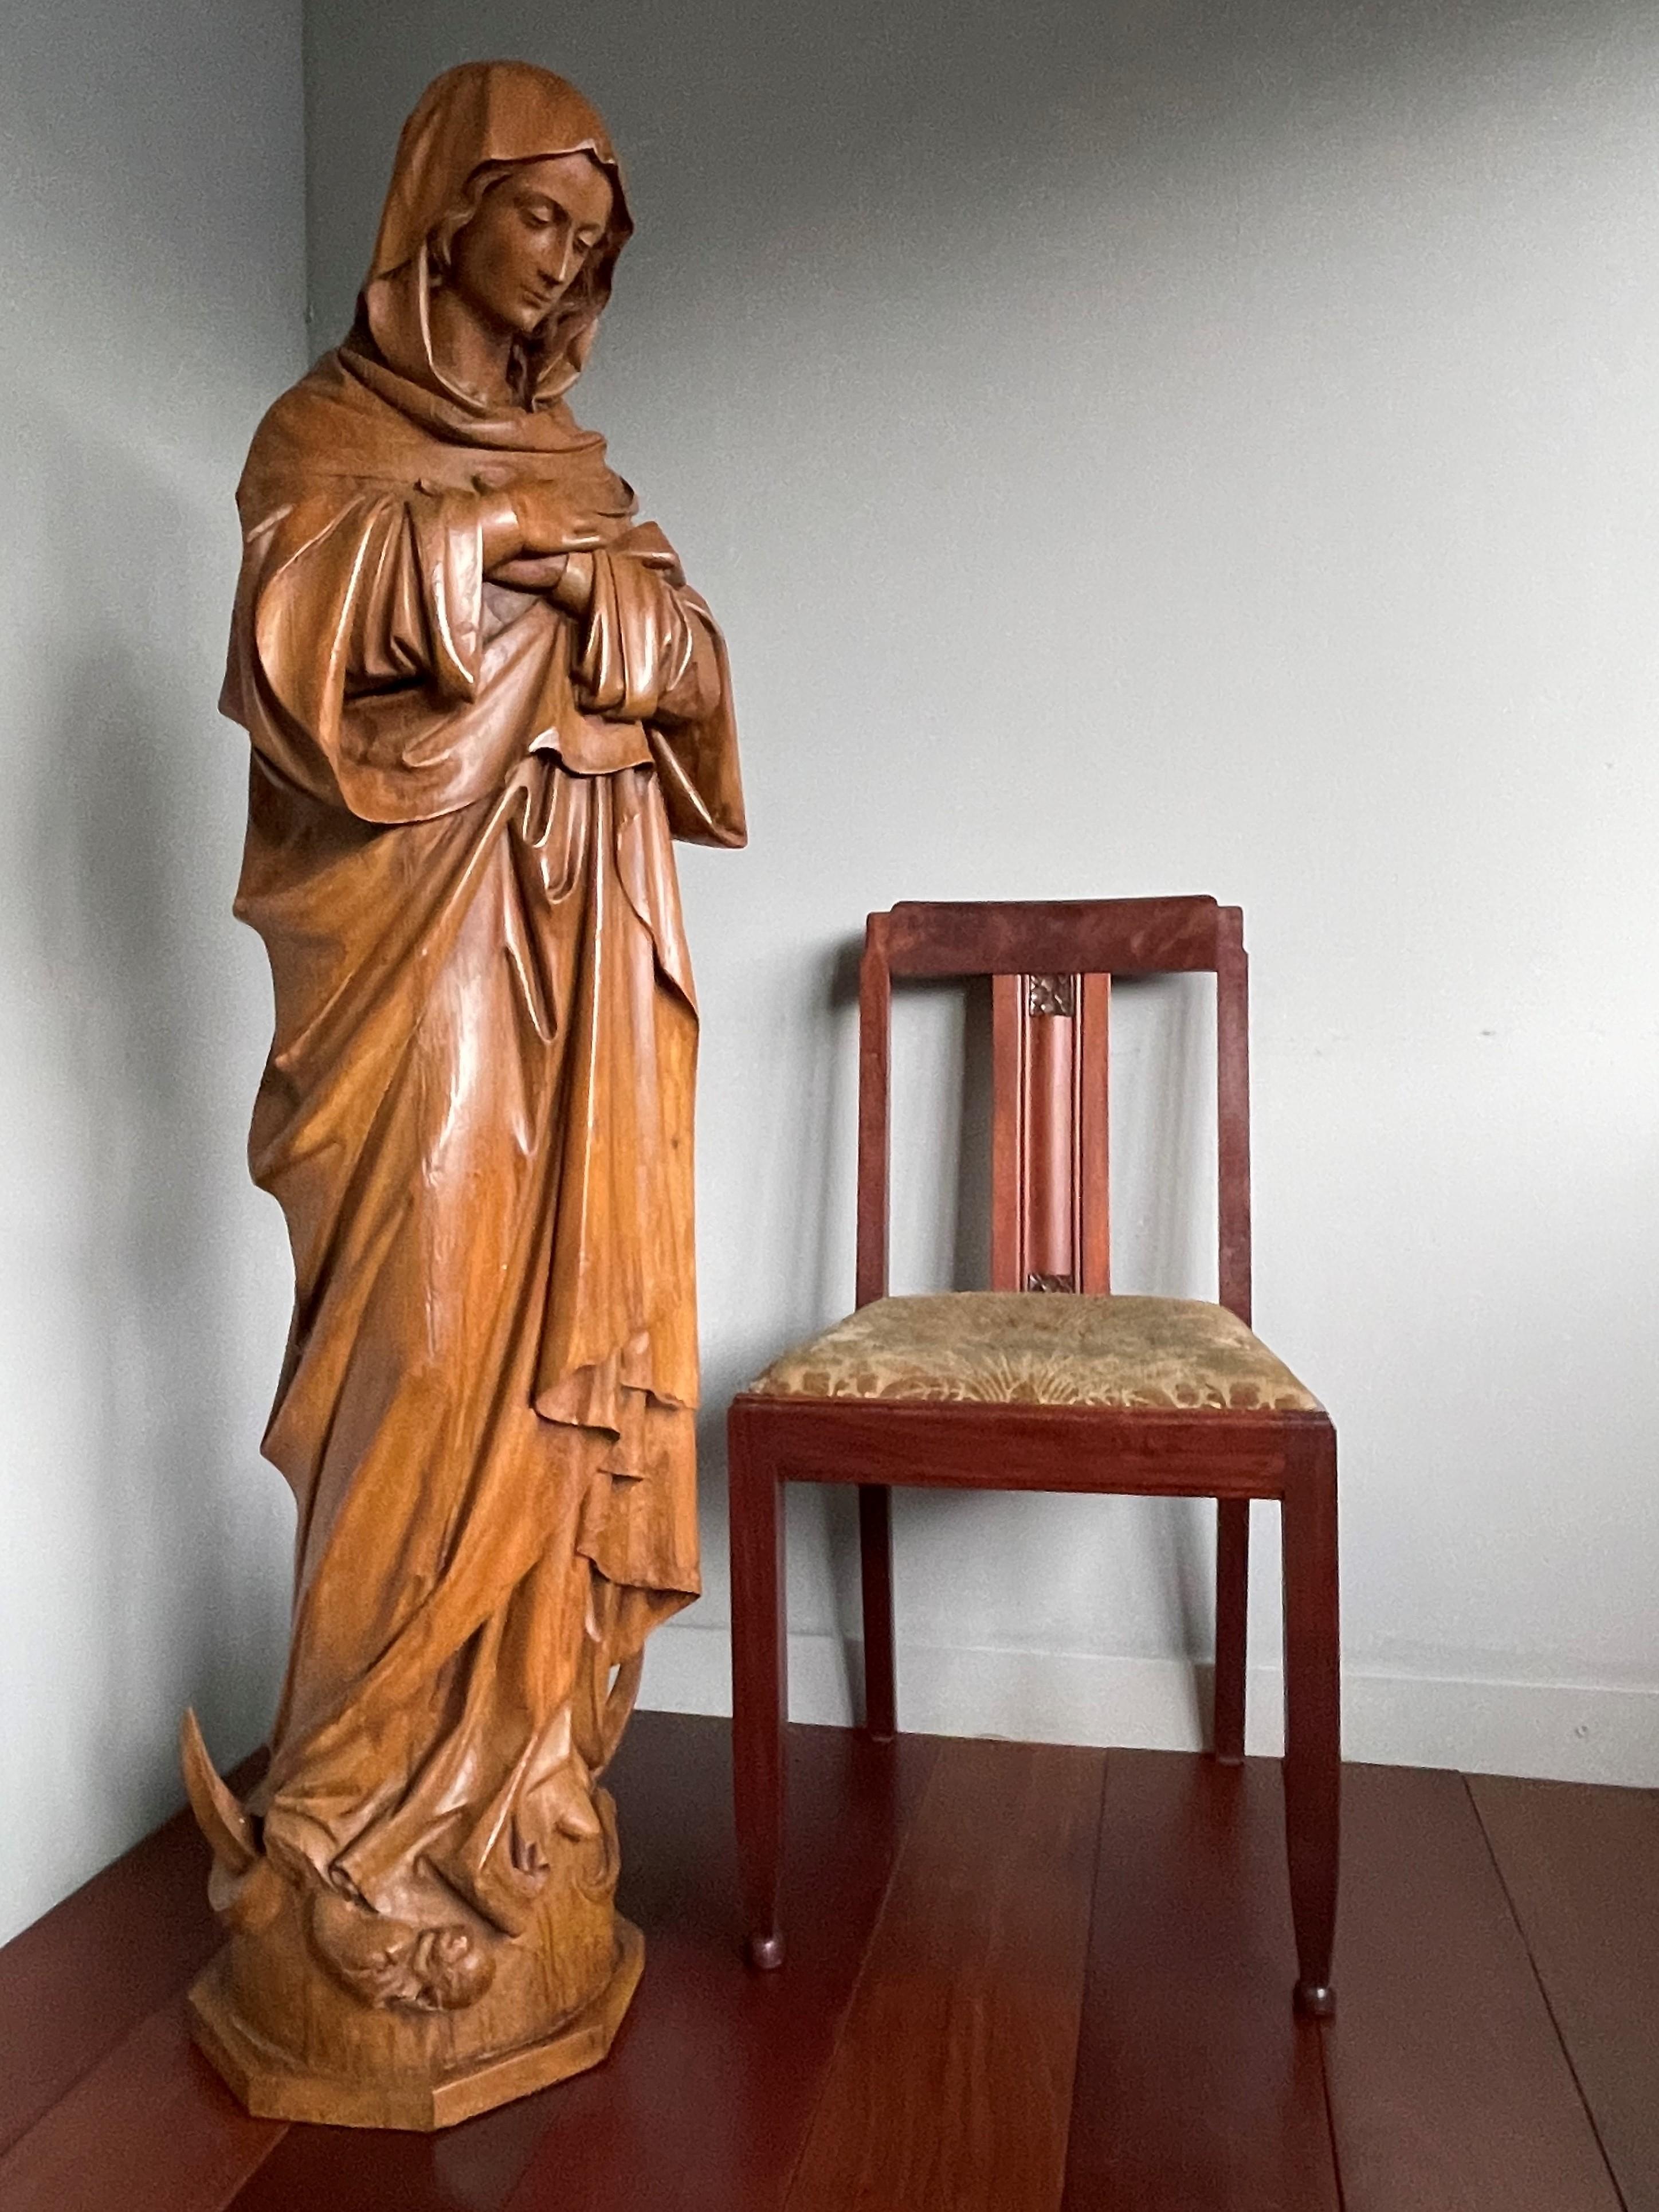 Stunning, late 1800s, wooden sculpture of a serene Mary with folded hands.

This stunning church relic is another great example of the quality of 19th century, European craftsmanship and we are grateful for it to have found its way to our gallery.